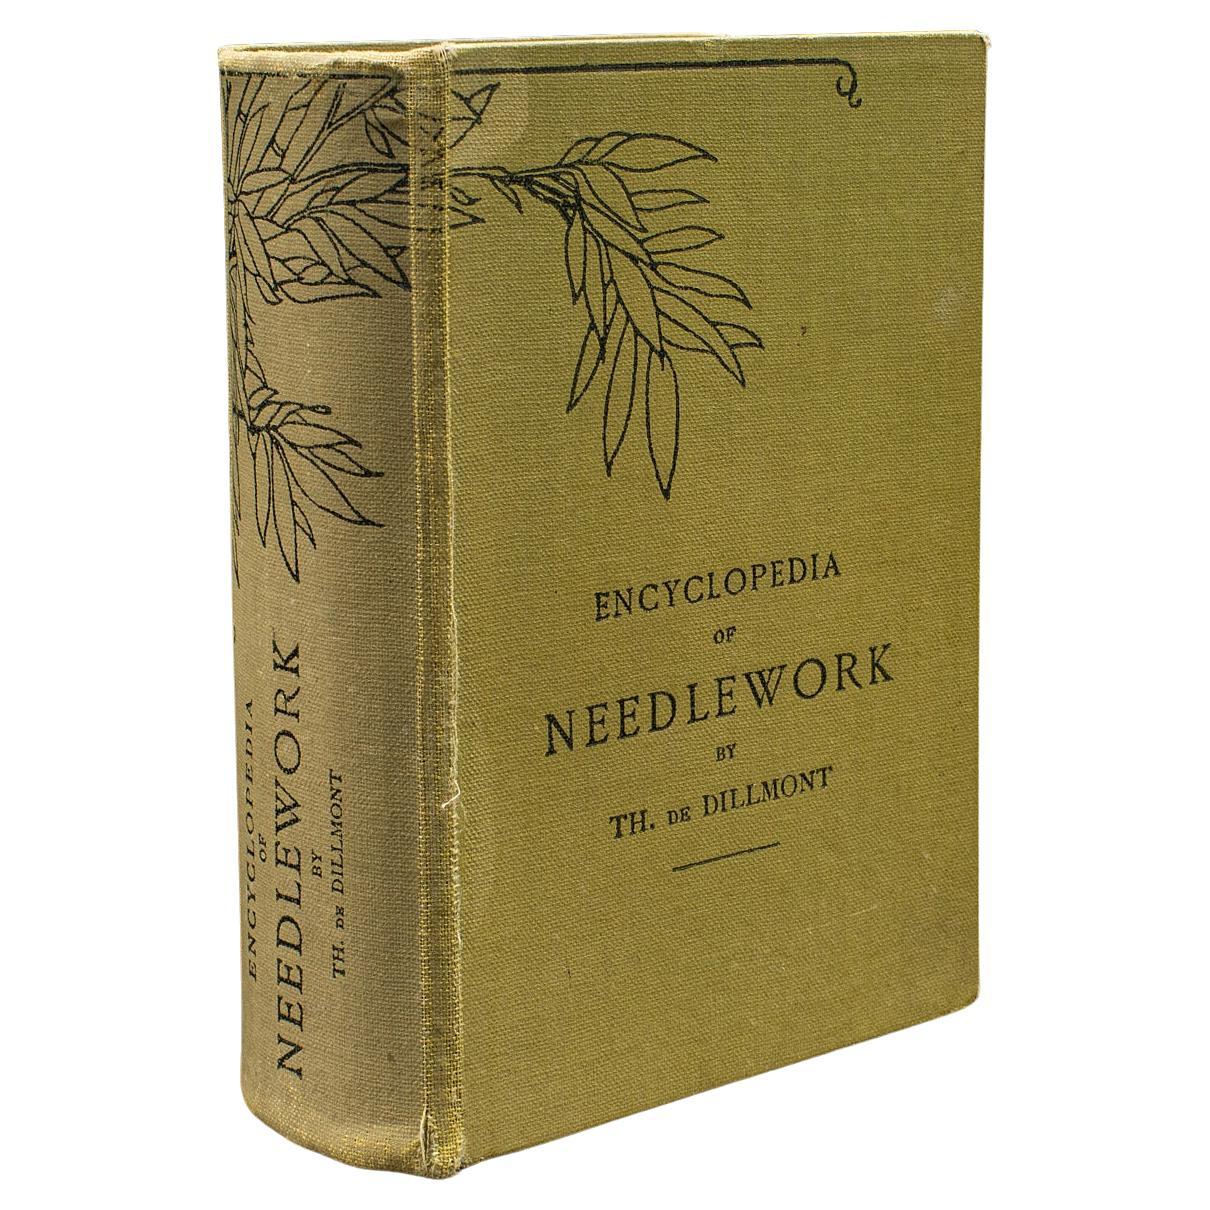 Antique Needlework Encyclopaedia, English, Embroidery, Pattern Guide, Circa 1900 For Sale